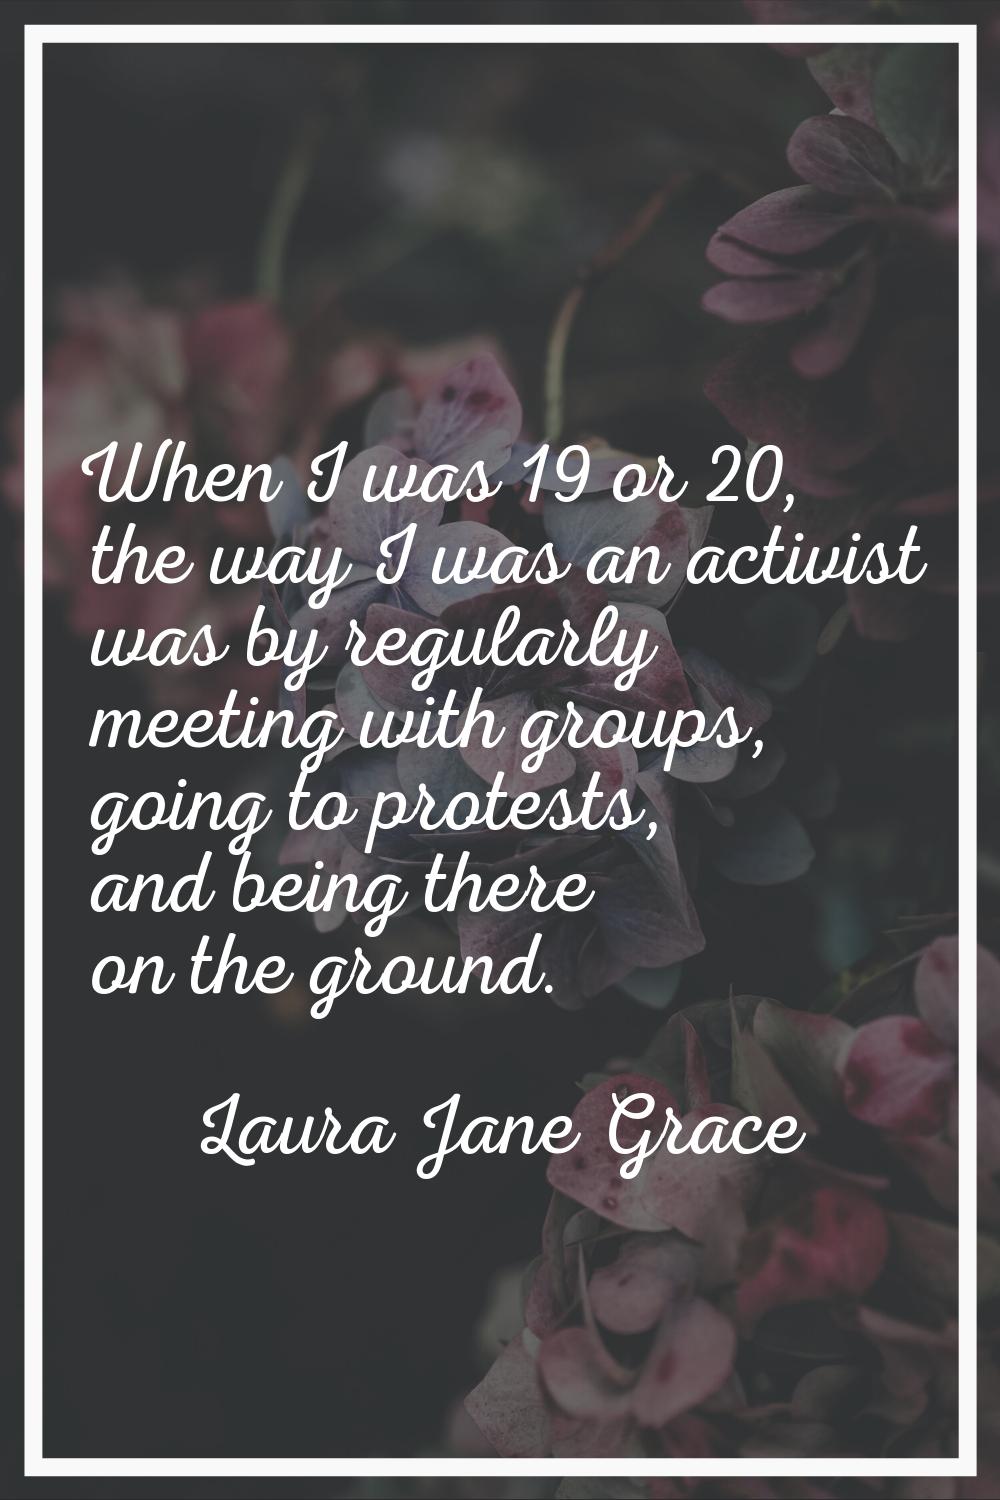 When I was 19 or 20, the way I was an activist was by regularly meeting with groups, going to prote